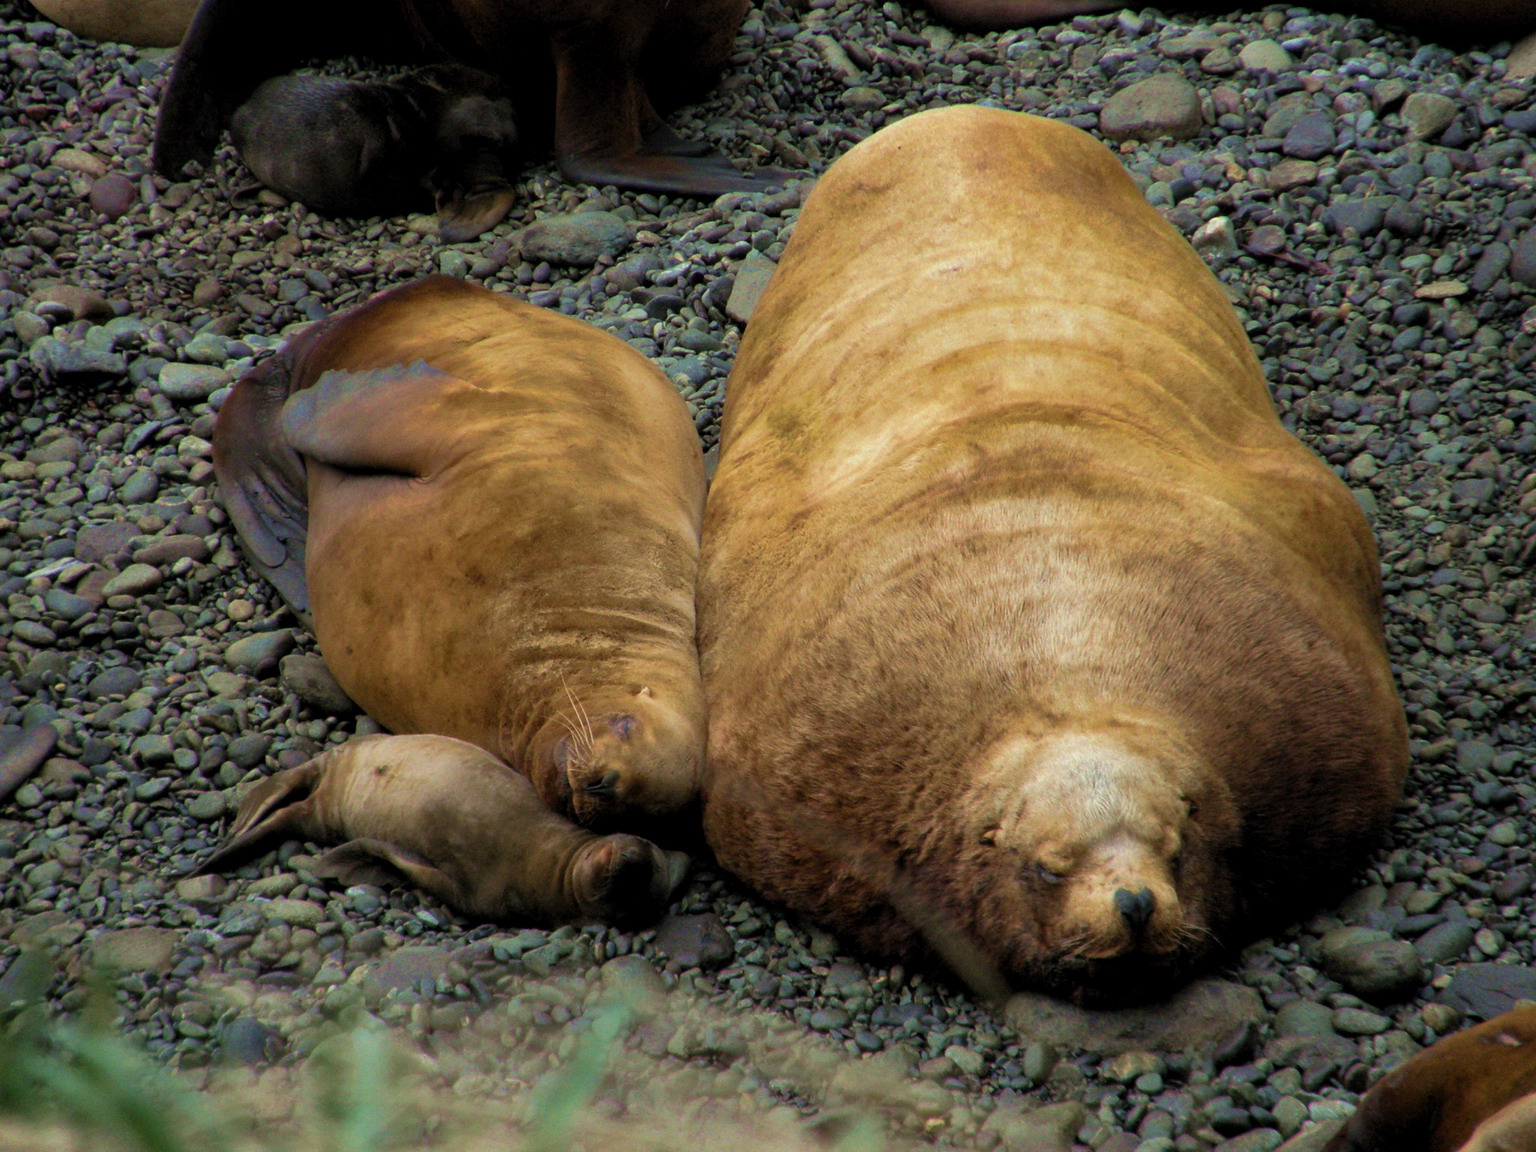 Toxins in turds: learning about algal toxins with sea lion poop